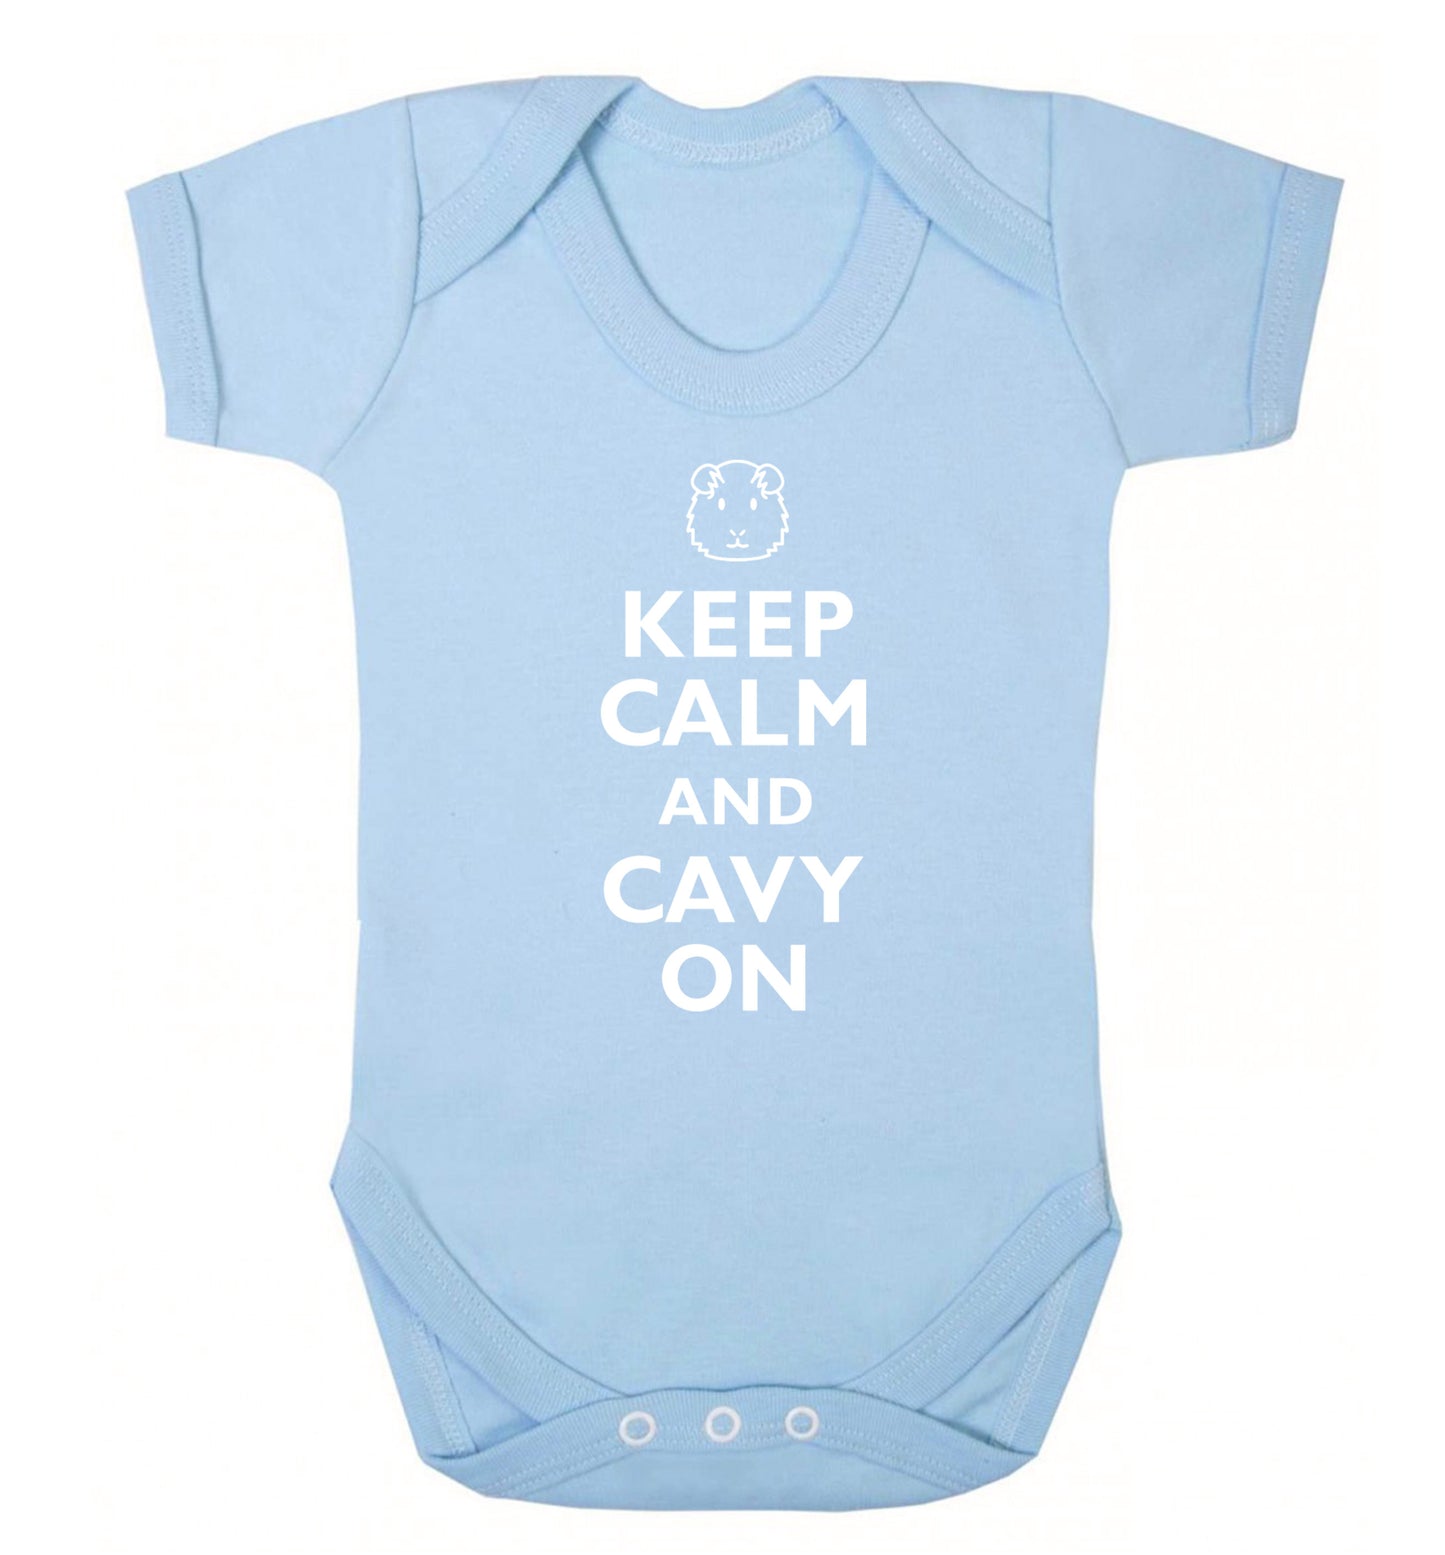 Keep calm and cavvy on Baby Vest pale blue 18-24 months